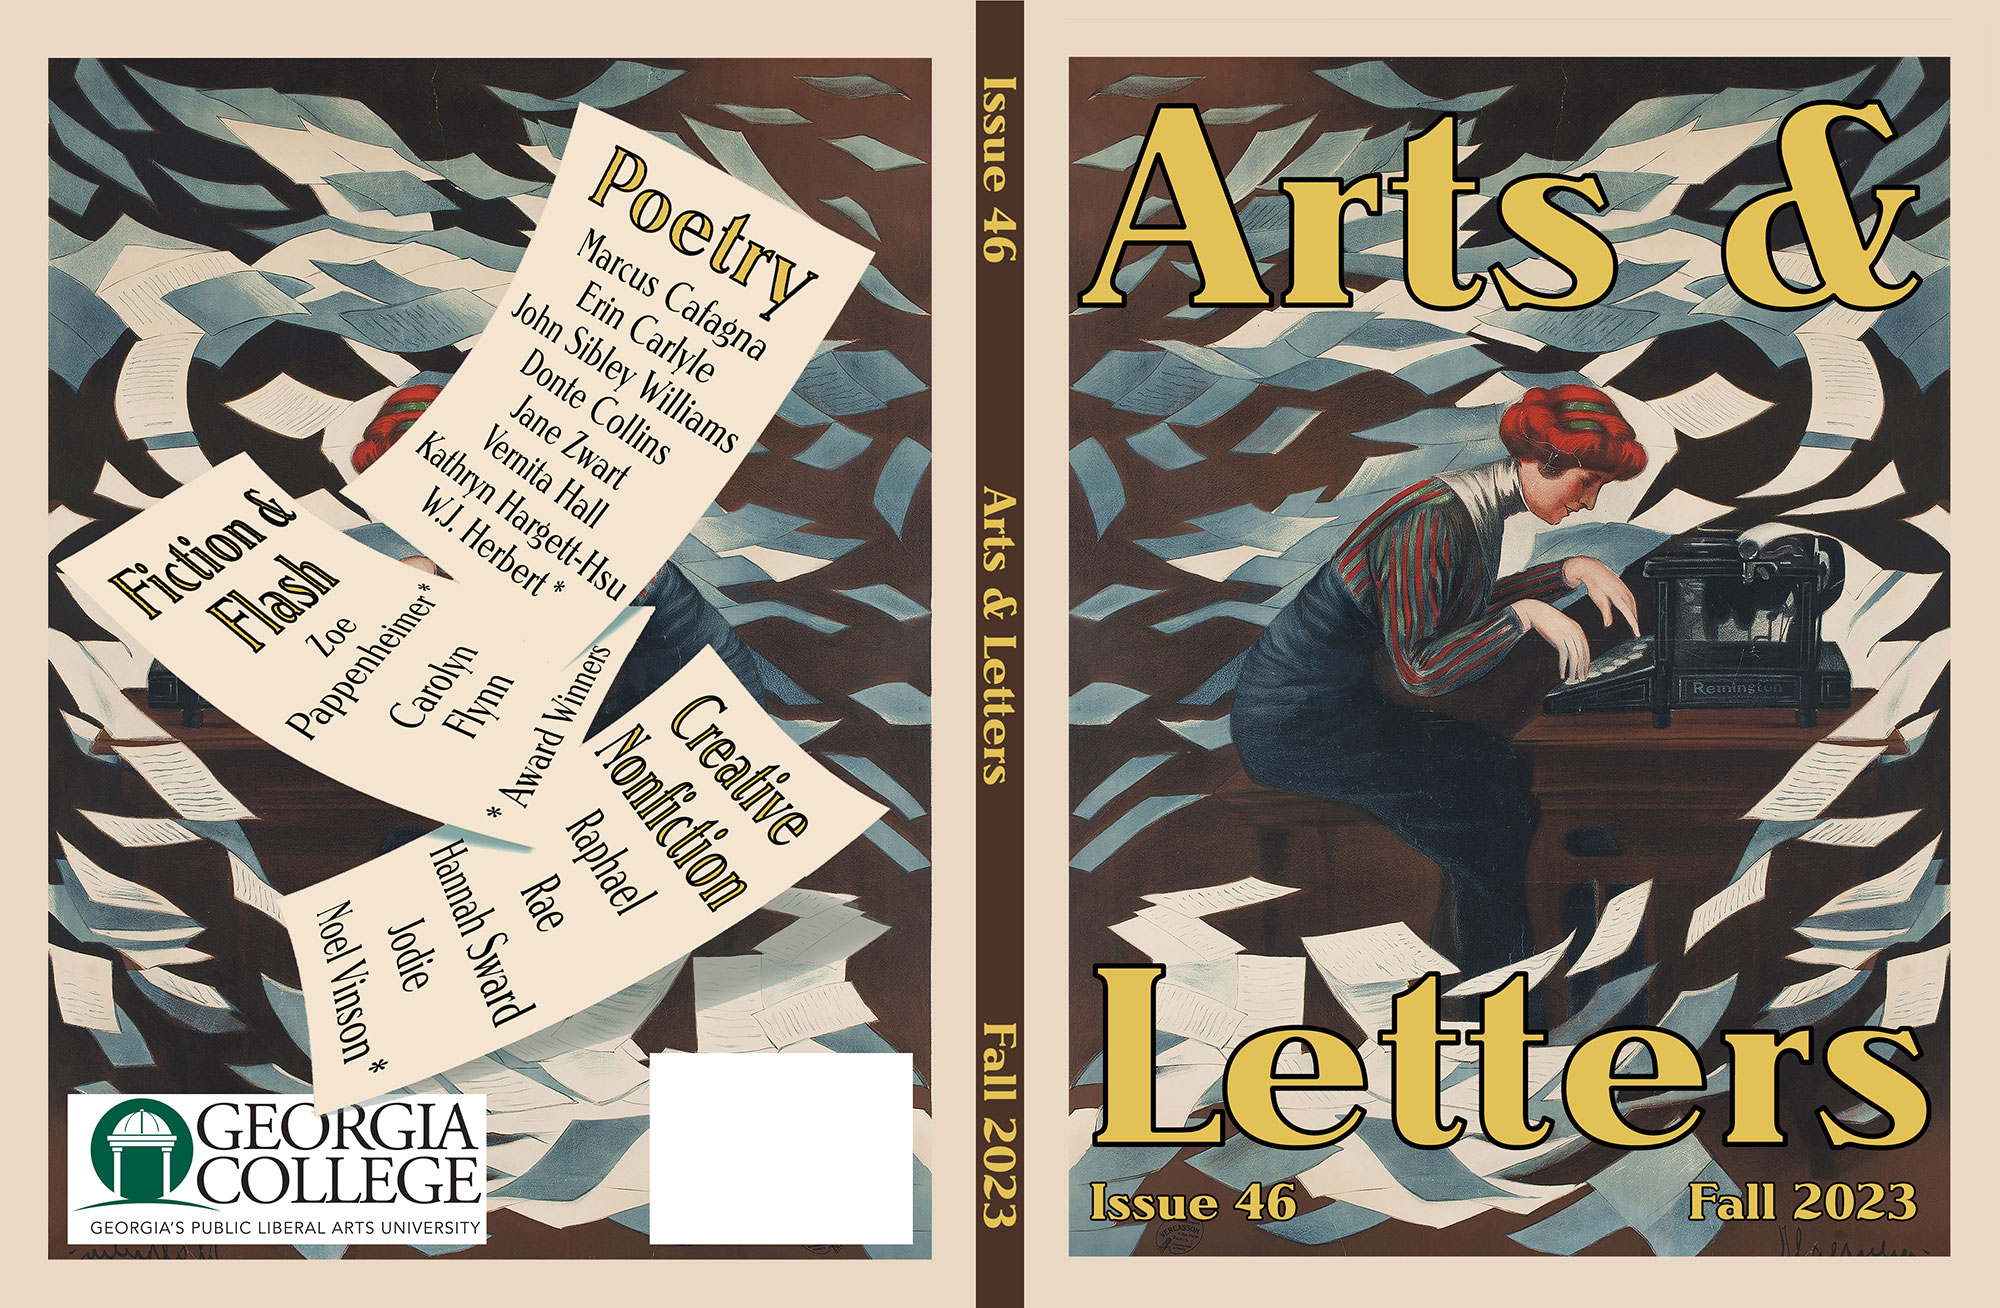 Arts & Letters, Issue 45